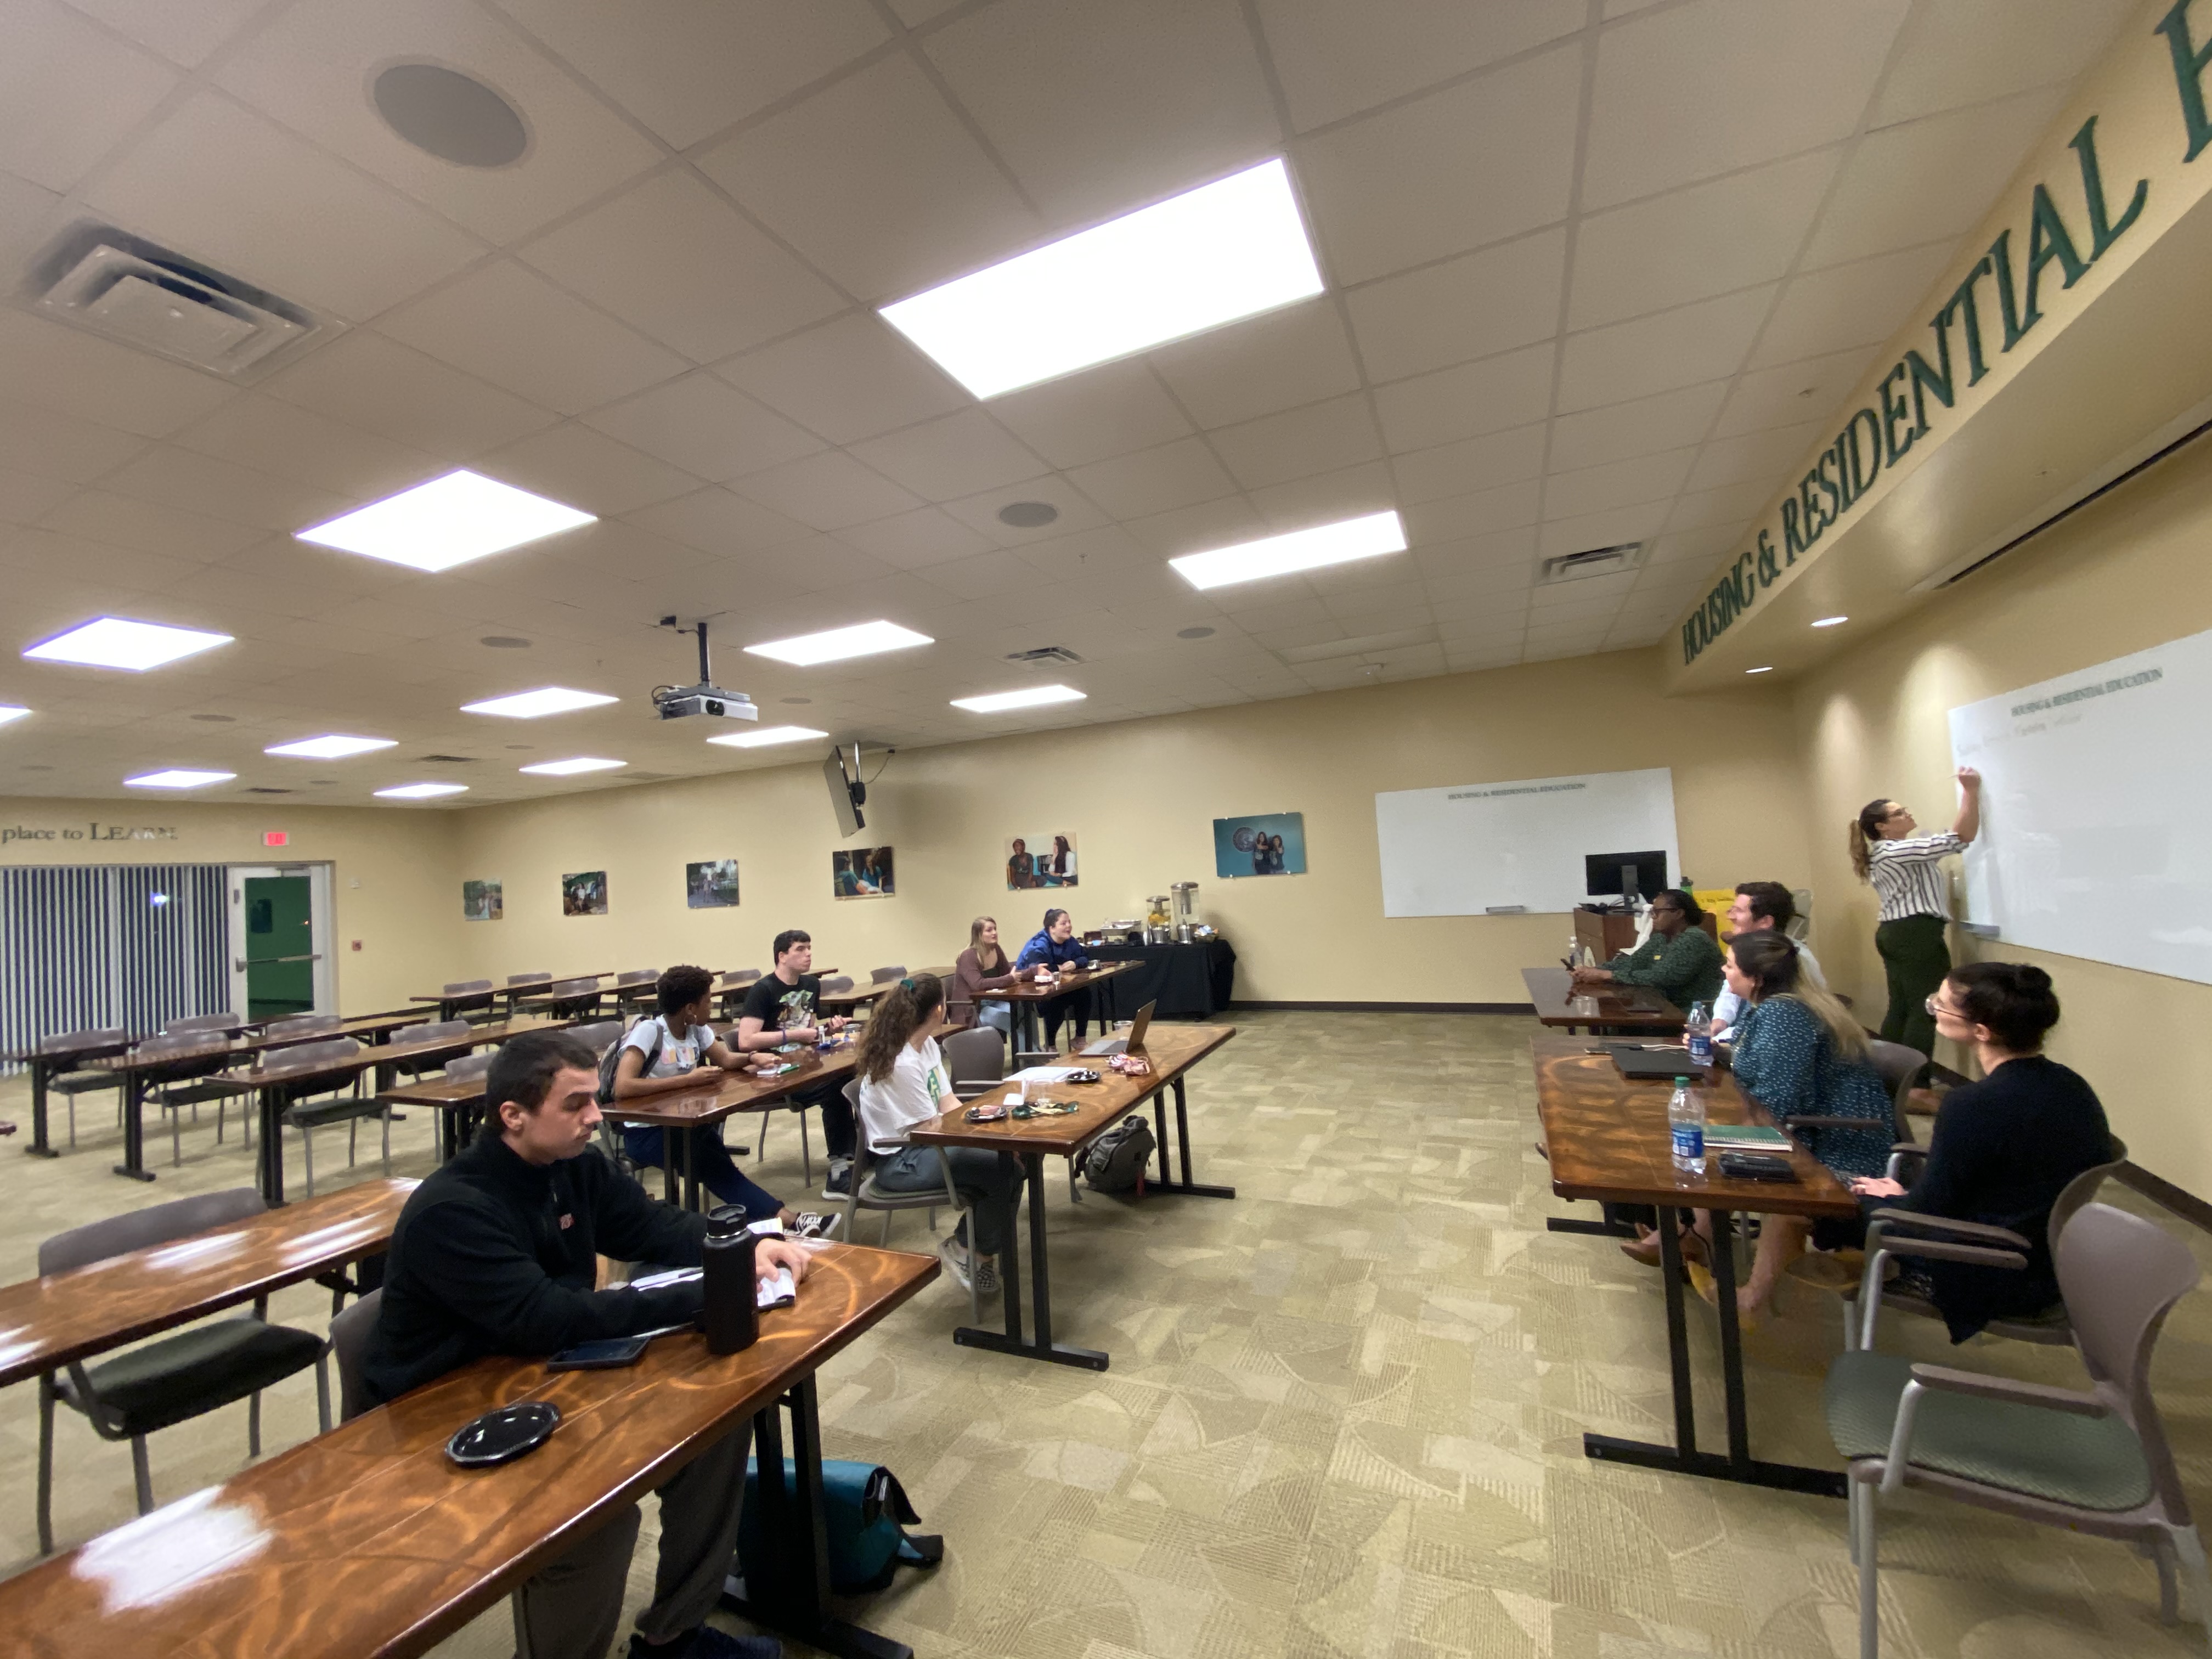 Forums held by USF Dining had students crawling for answers